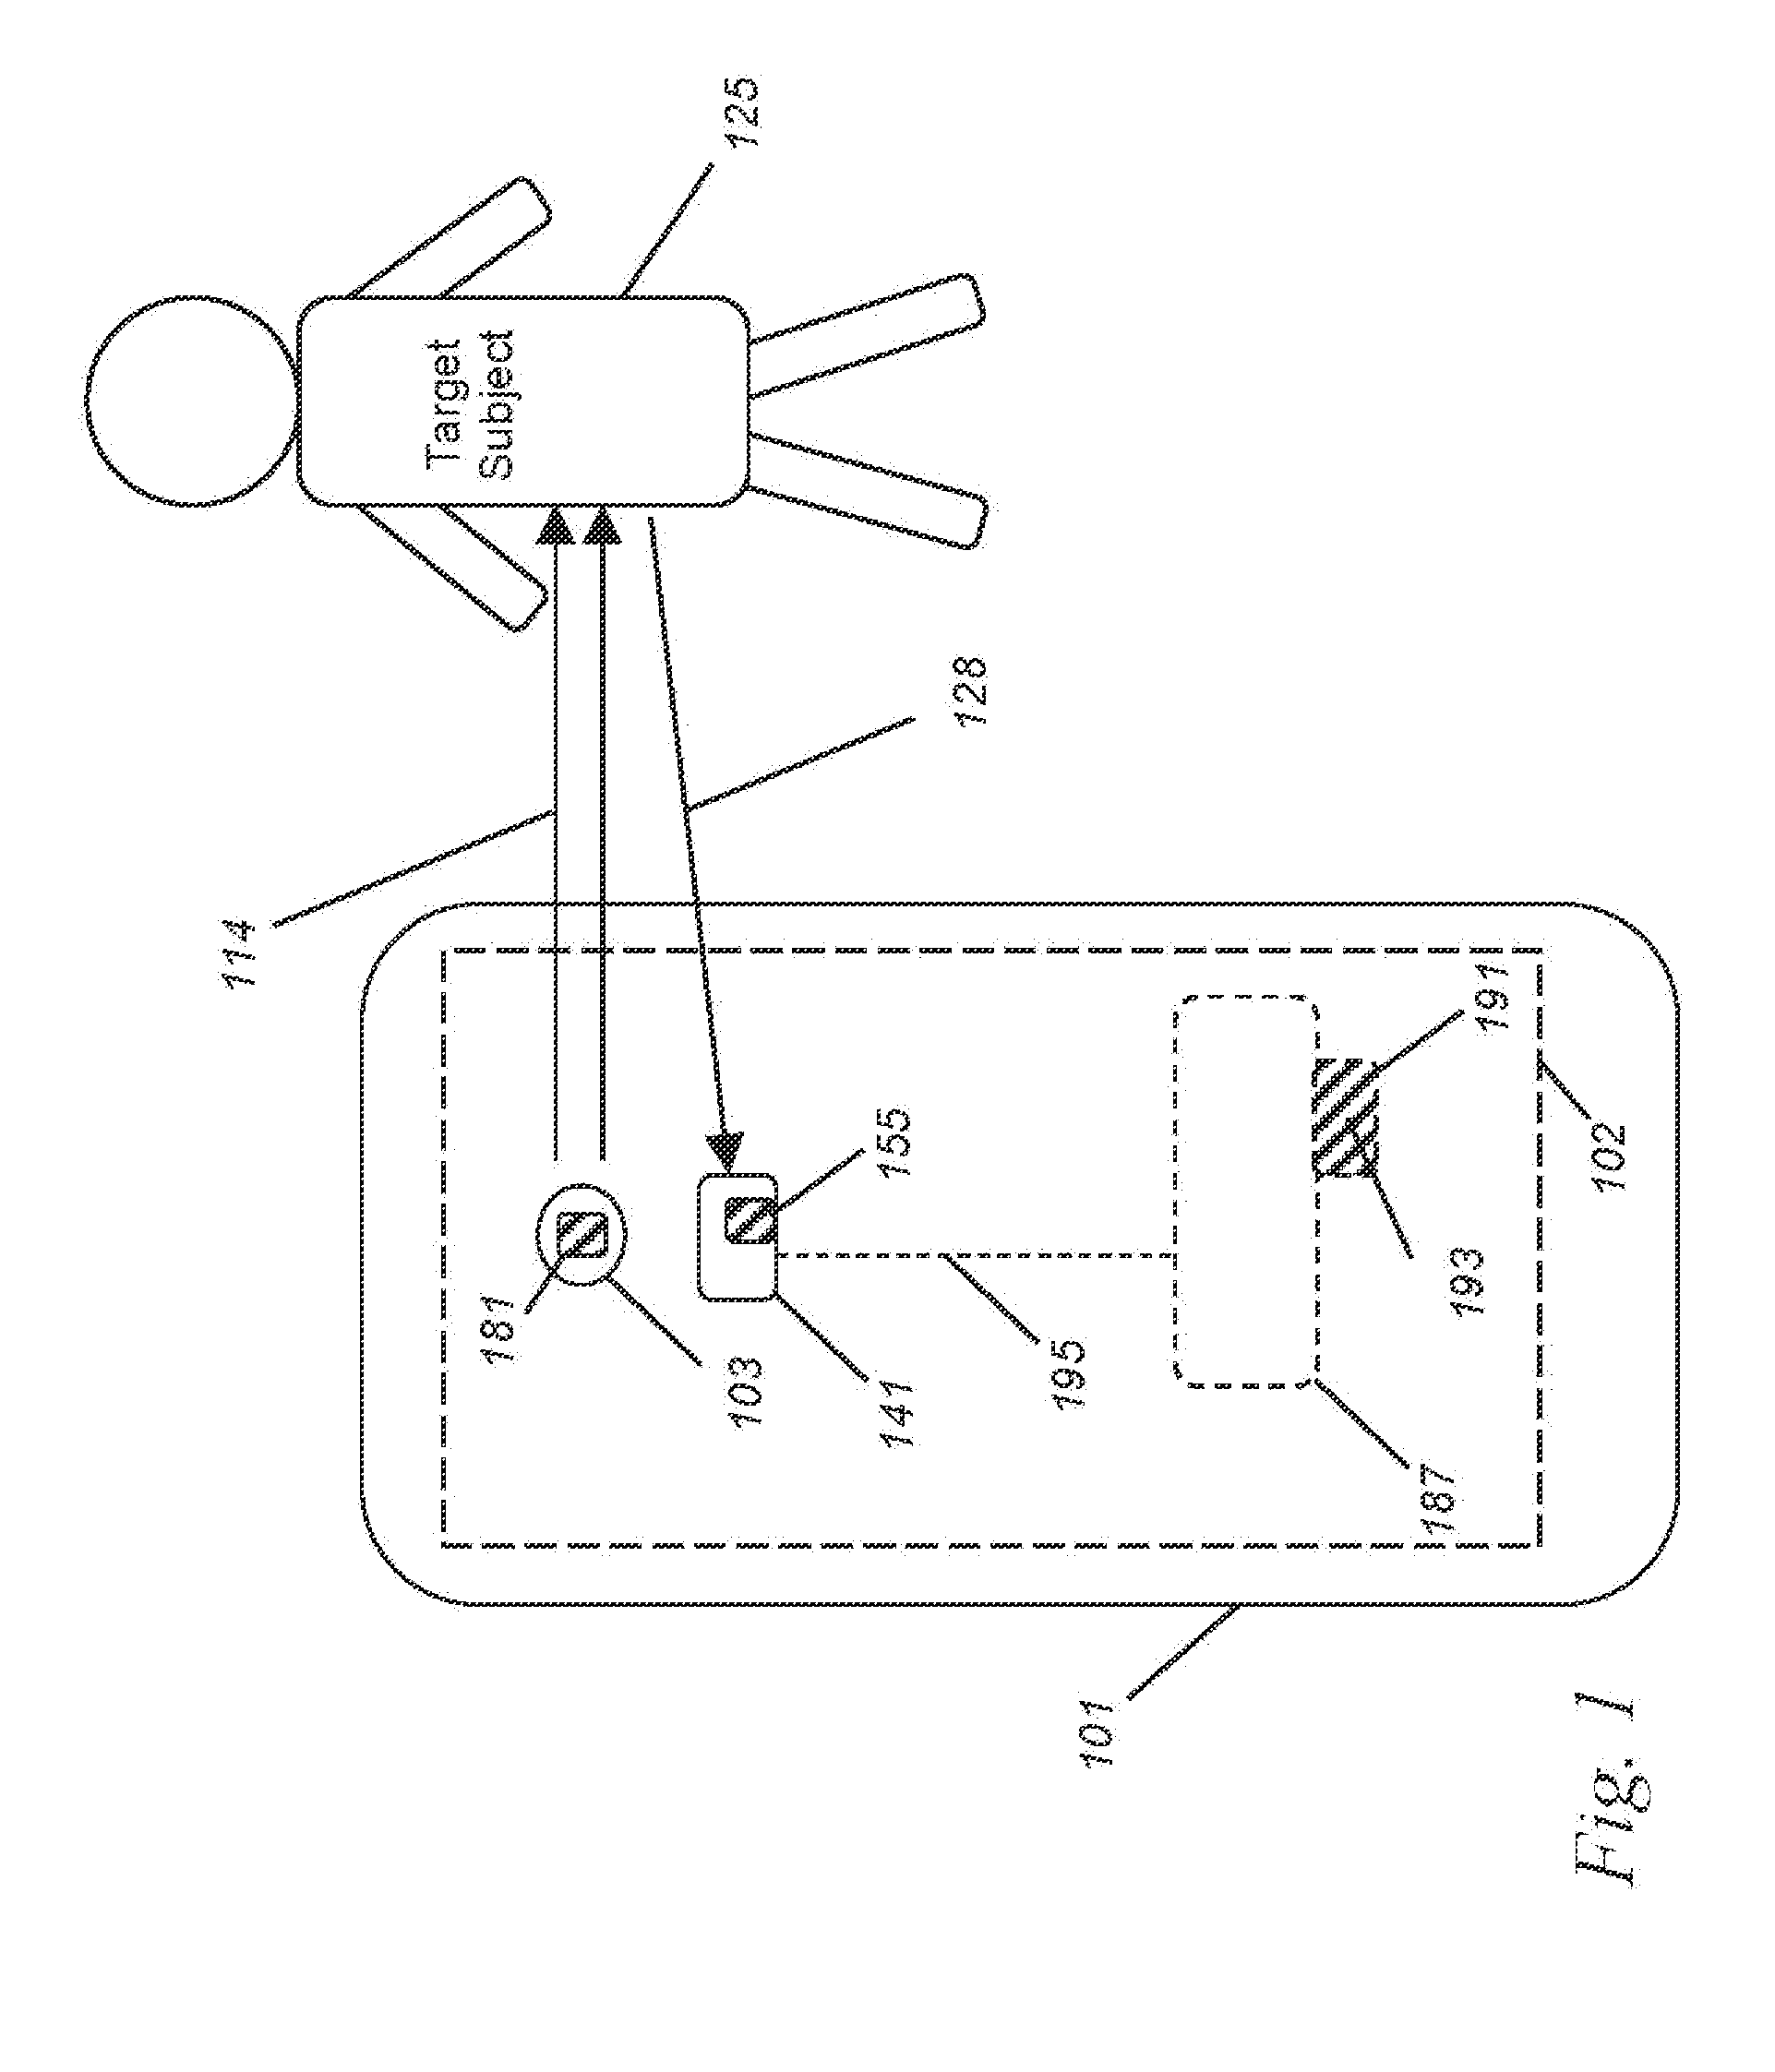 Method For Detecting Physiology At Distance Or During Movement  For Mobile Devices, Illumination, Security, Occupancy Sensors, And Wearables